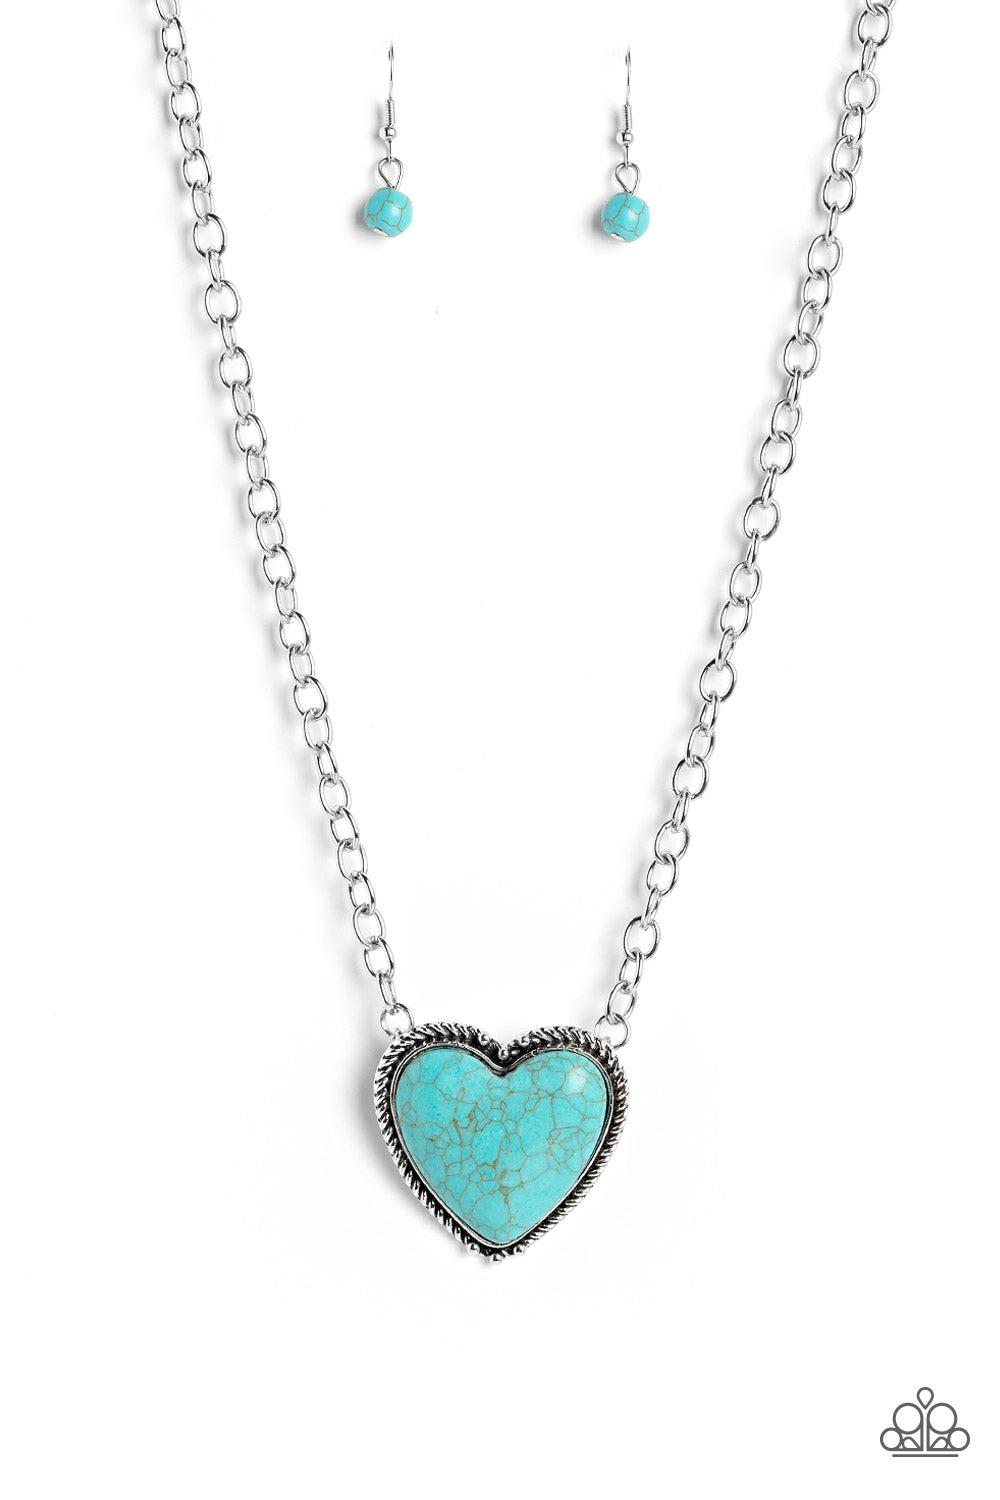 Authentic Admirer Turquoise Blue Stone Heart Necklace - Paparazzi Accessories- lightbox - CarasShop.com - $5 Jewelry by Cara Jewels